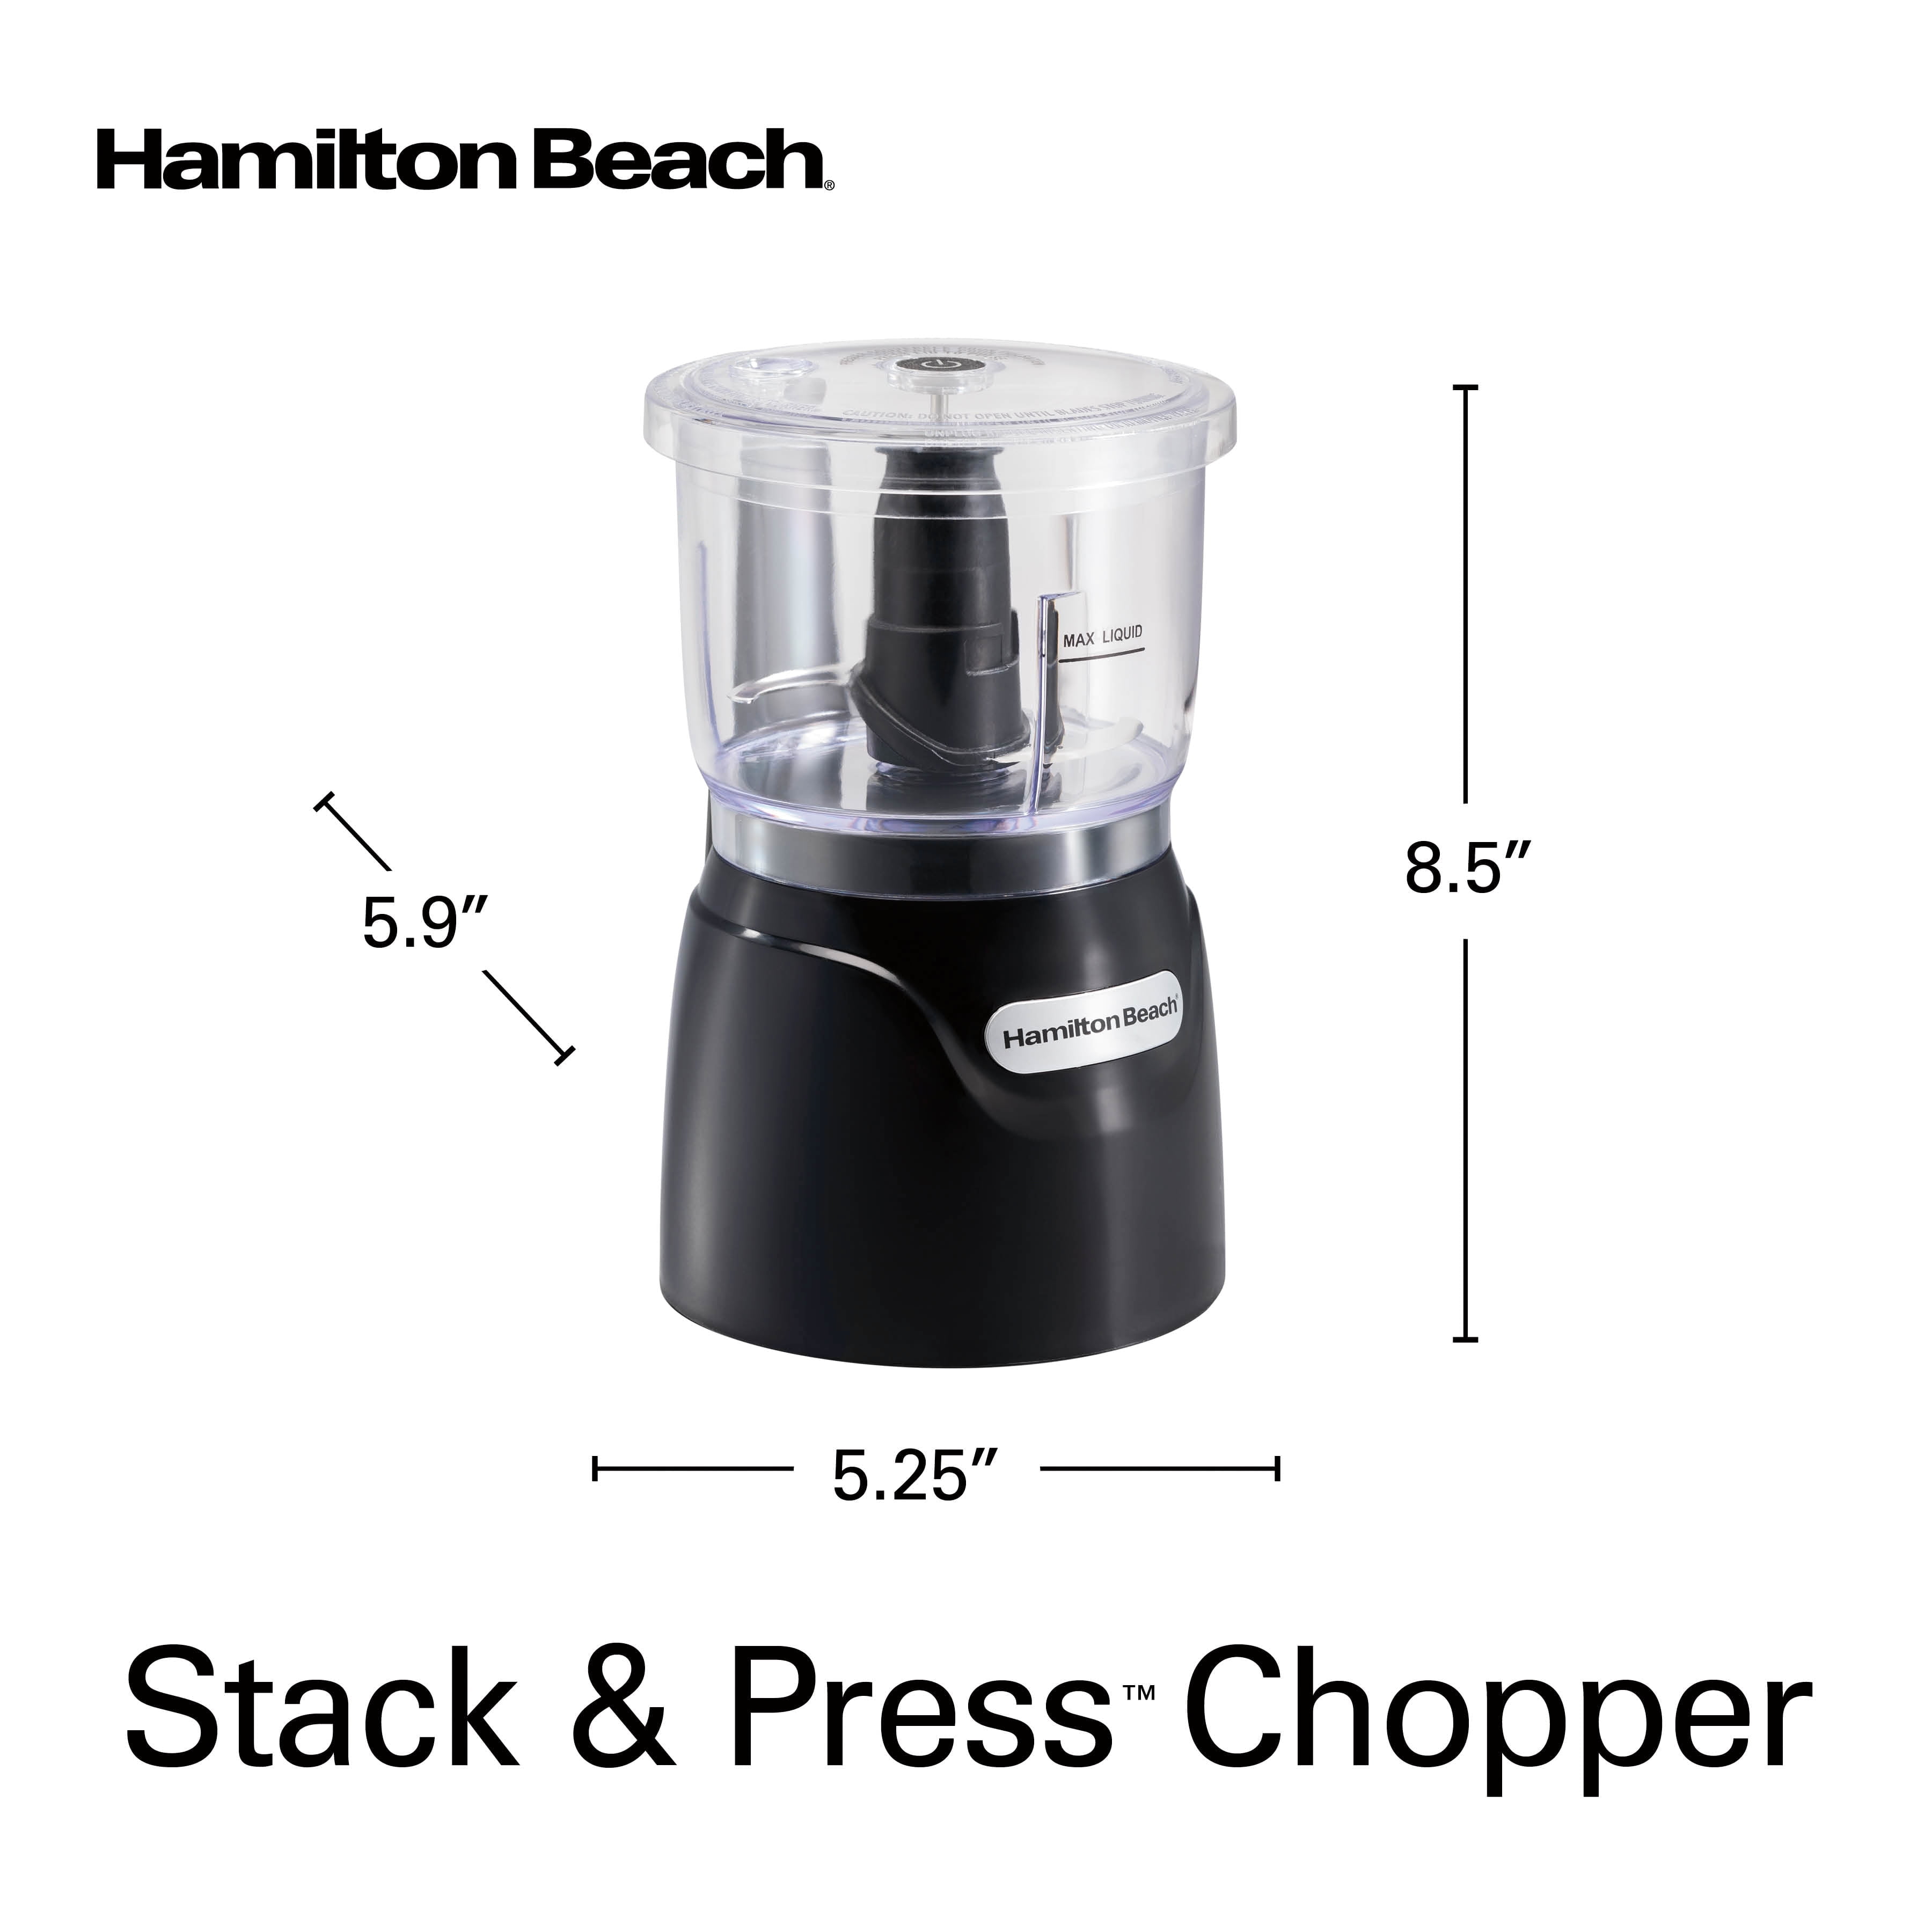 Hamilton Beach Food Processor & Vegetable Chopper for Slicing, Shredding,  Mincing, and Puree, 8 Cup, Black and BLACK+DECKER Lightweight Hand Mixer